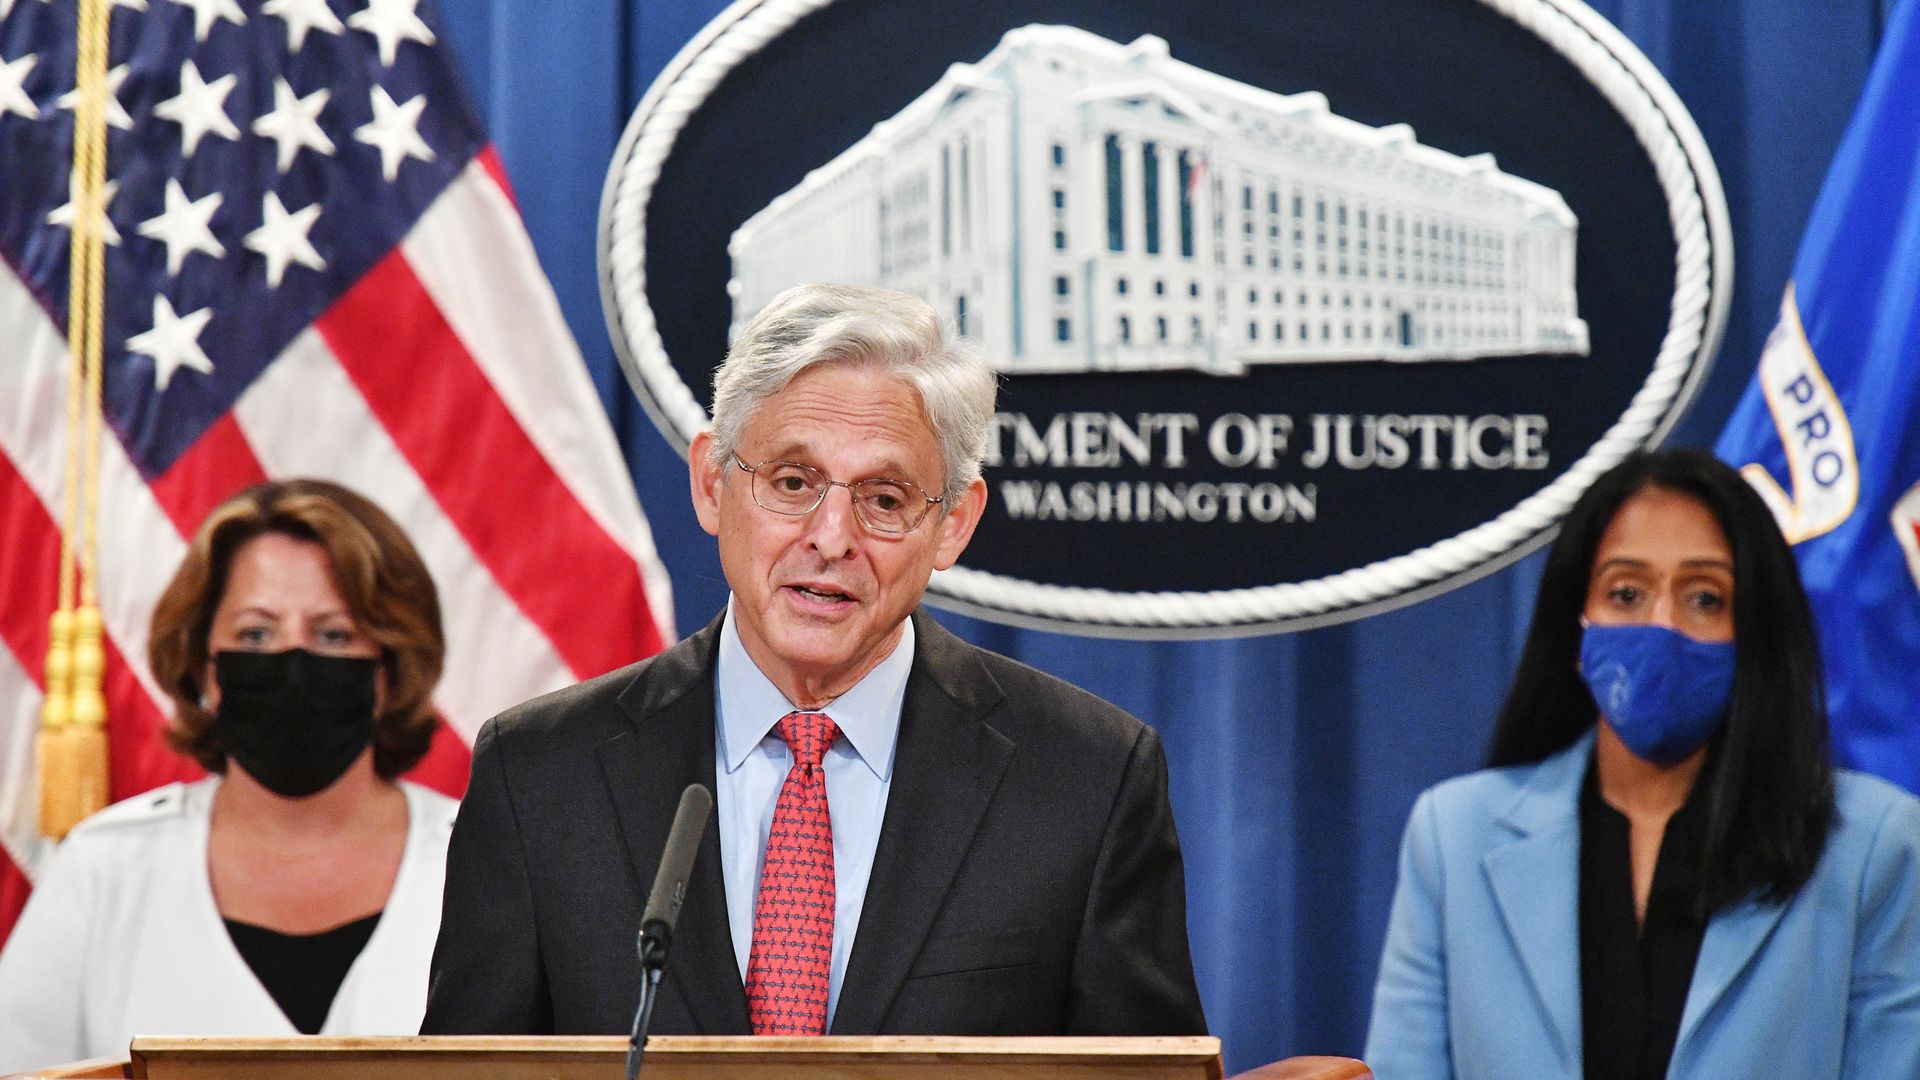 Attorney General Merrick Garland speaking at a press conference